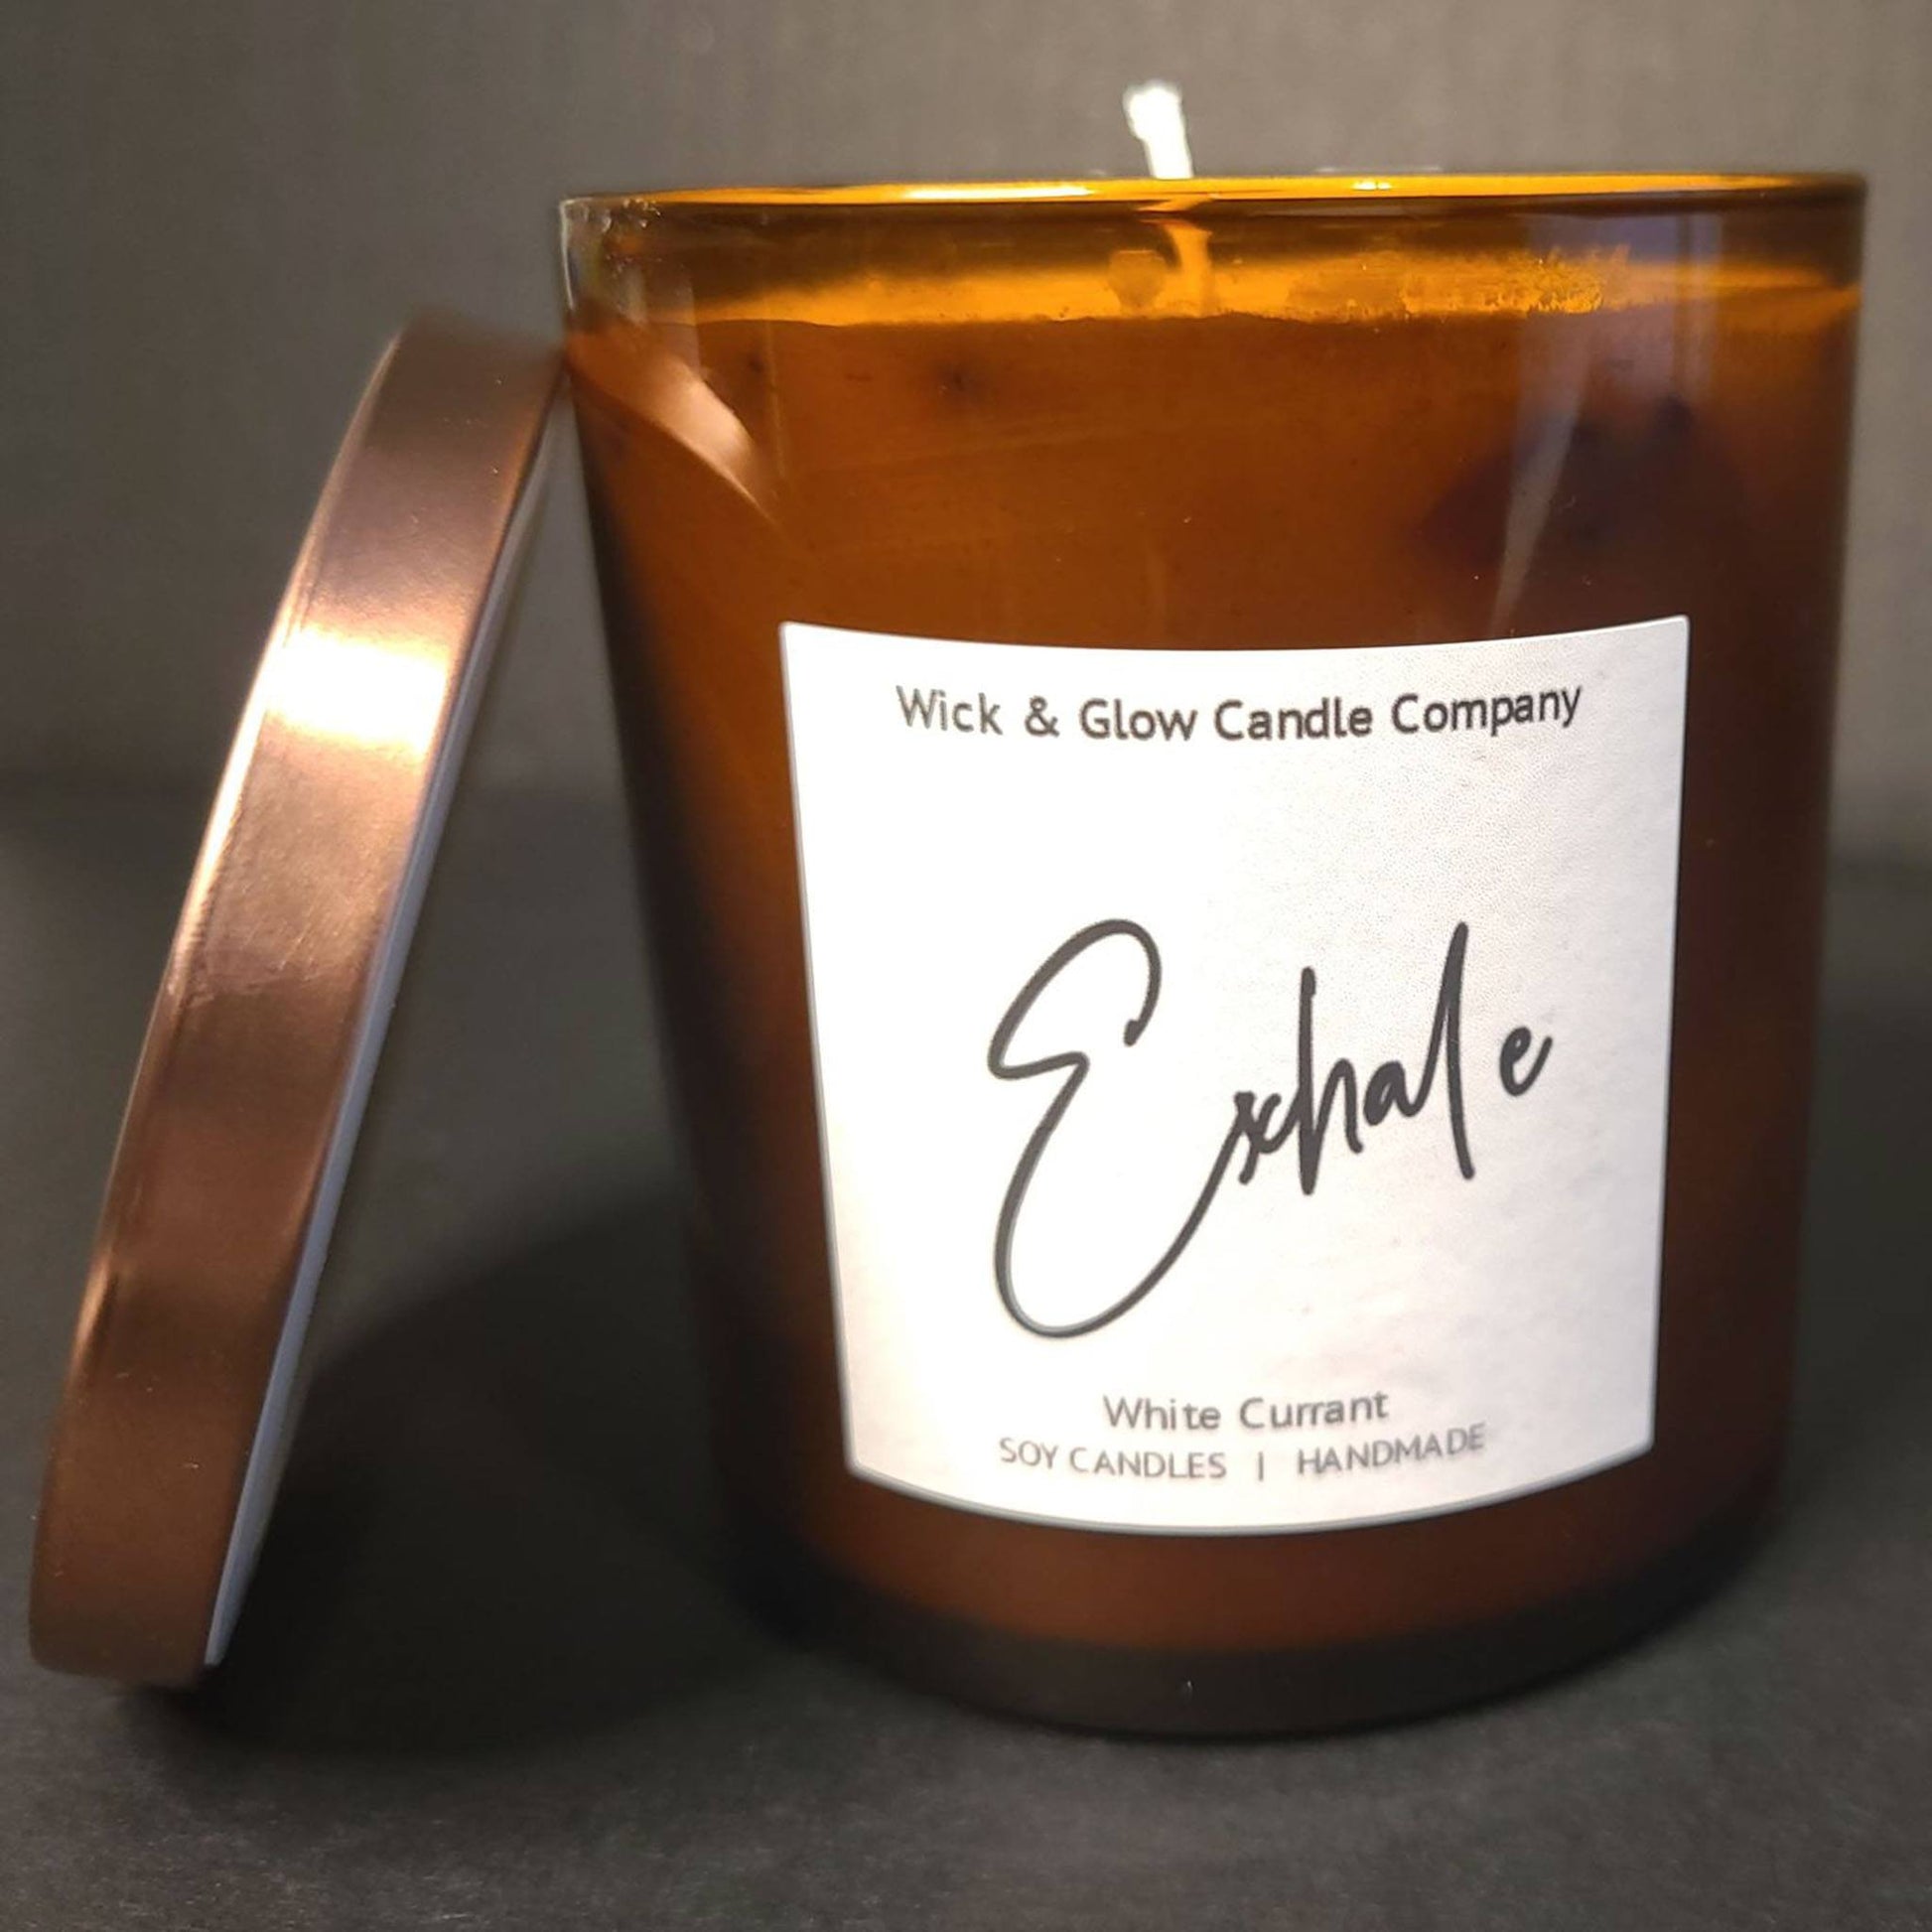 Exhale-White Currant Luxury Scented Candle - The Wick and Glow Candle Company